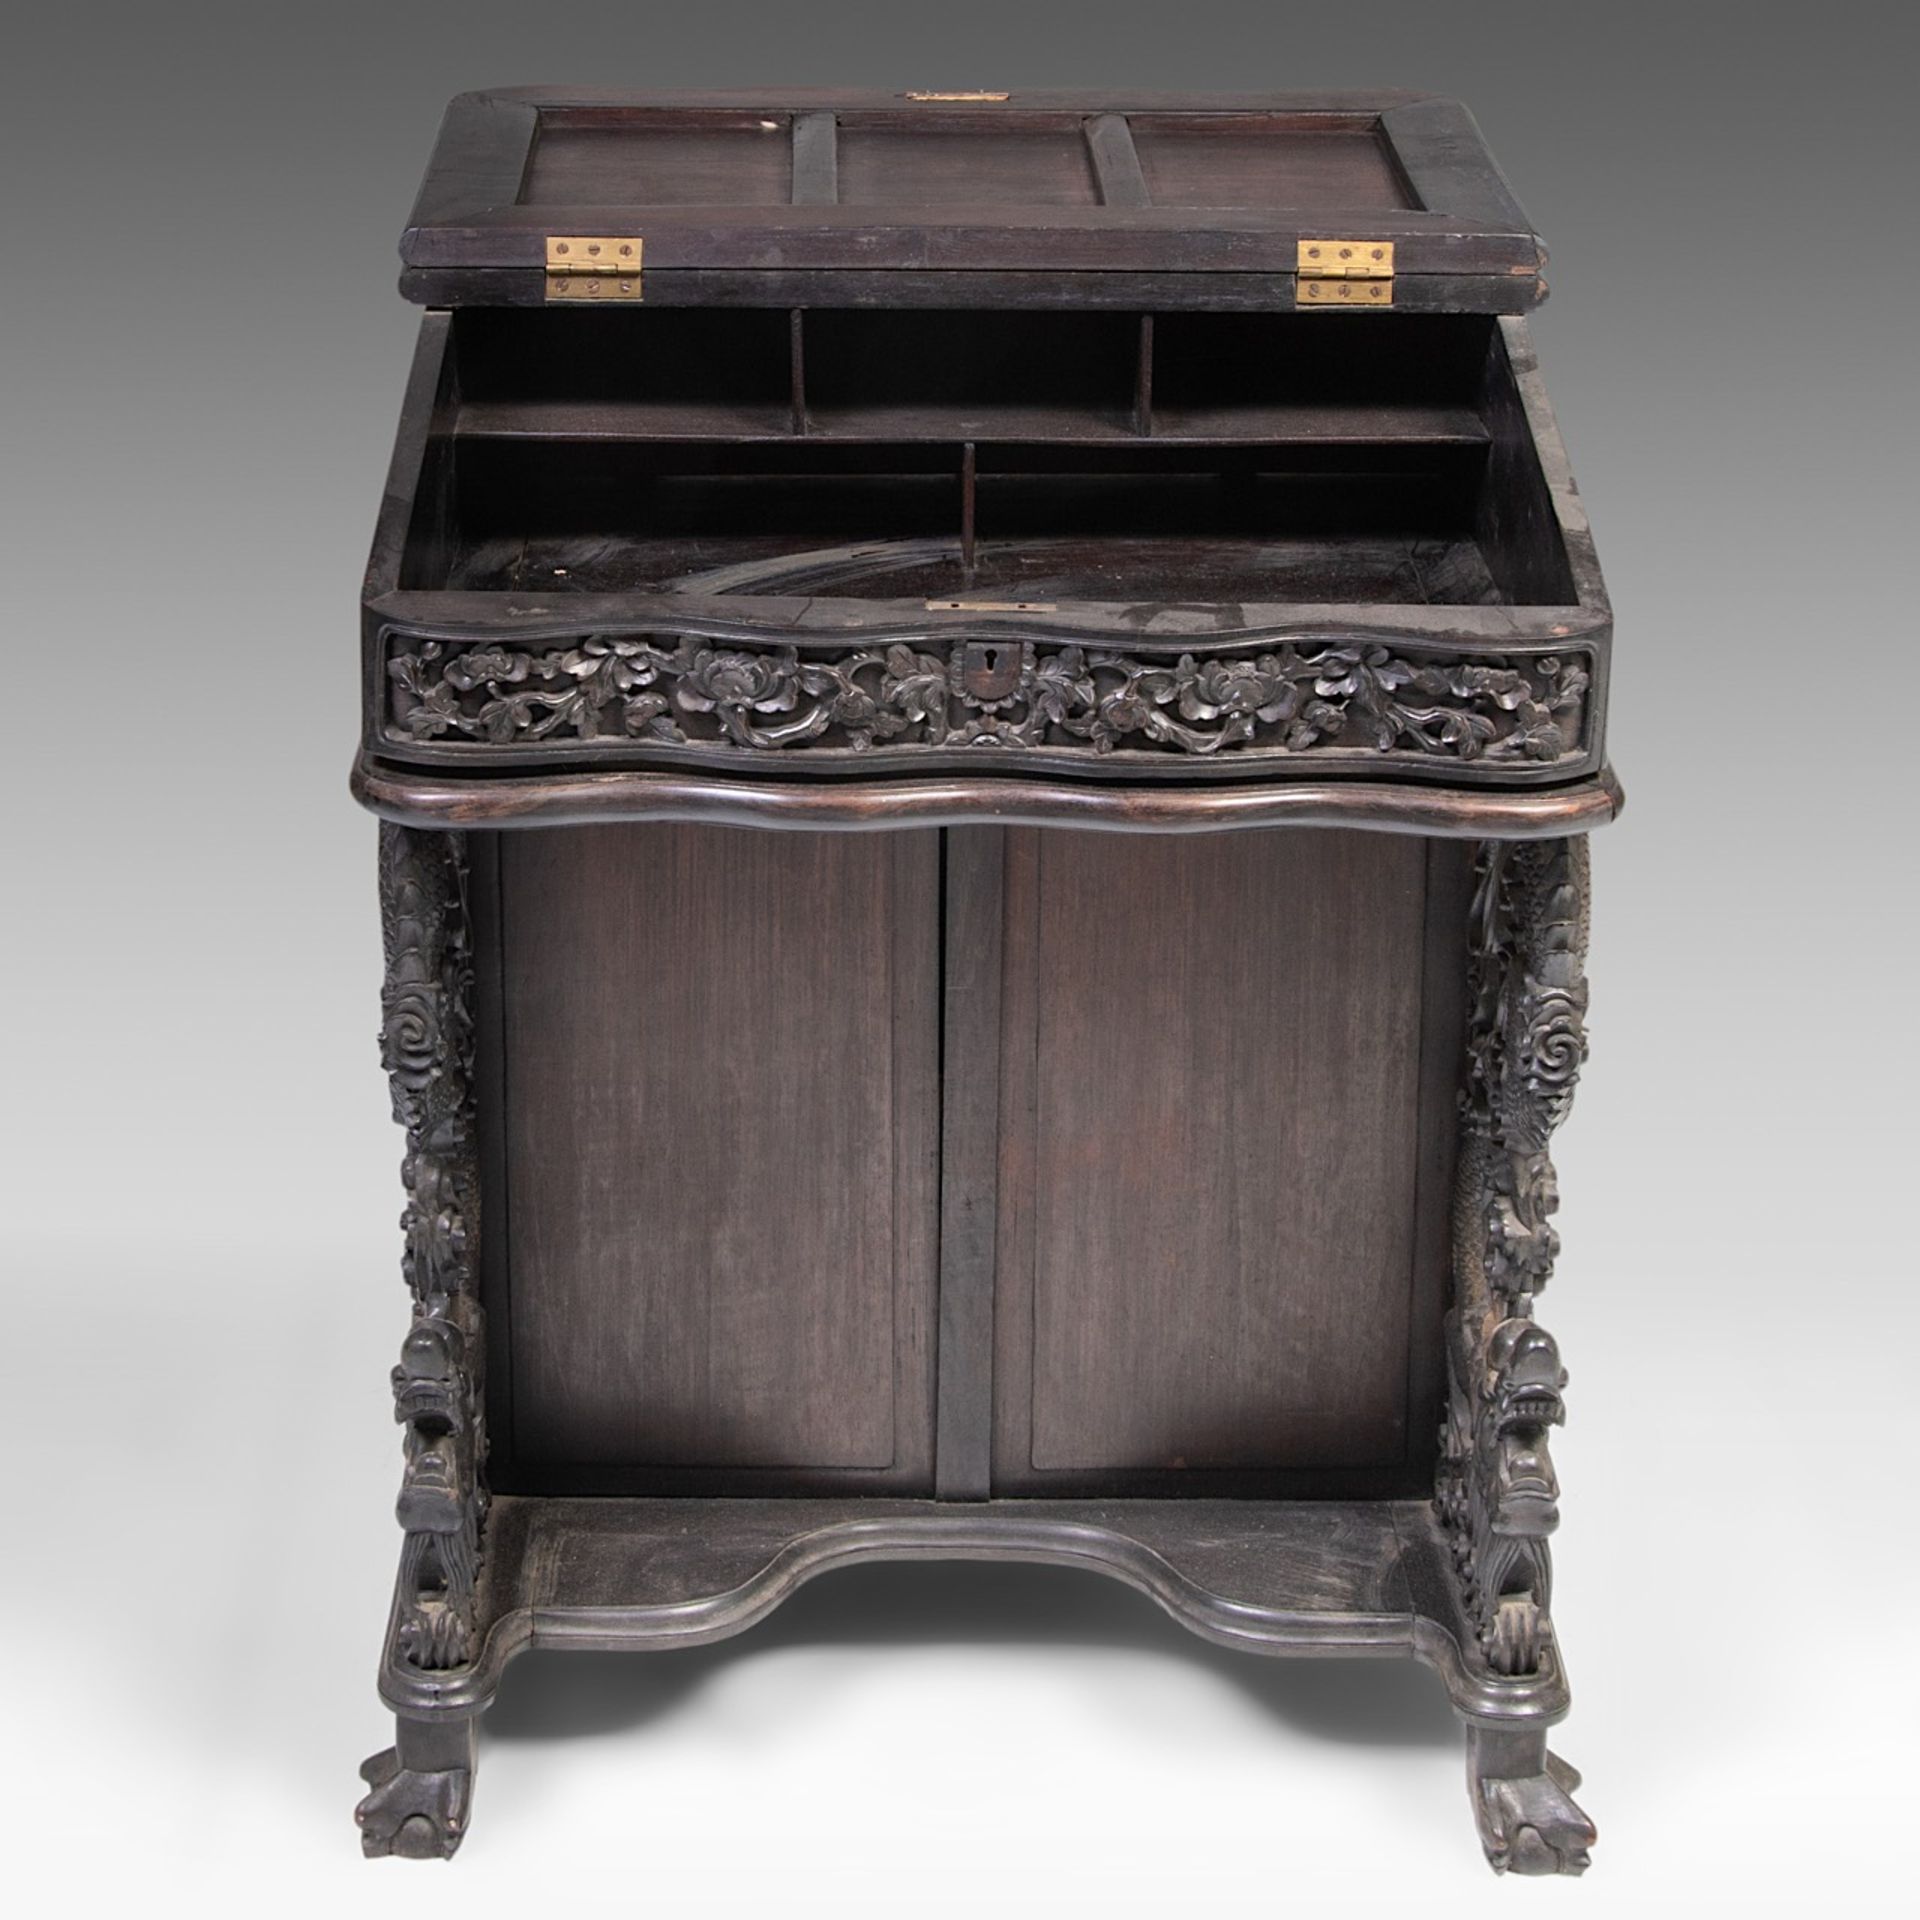 A compact South Chinese carved hardwood writing desk, 19thC, H 83 - W 66 - D 62 cm - Bild 7 aus 10